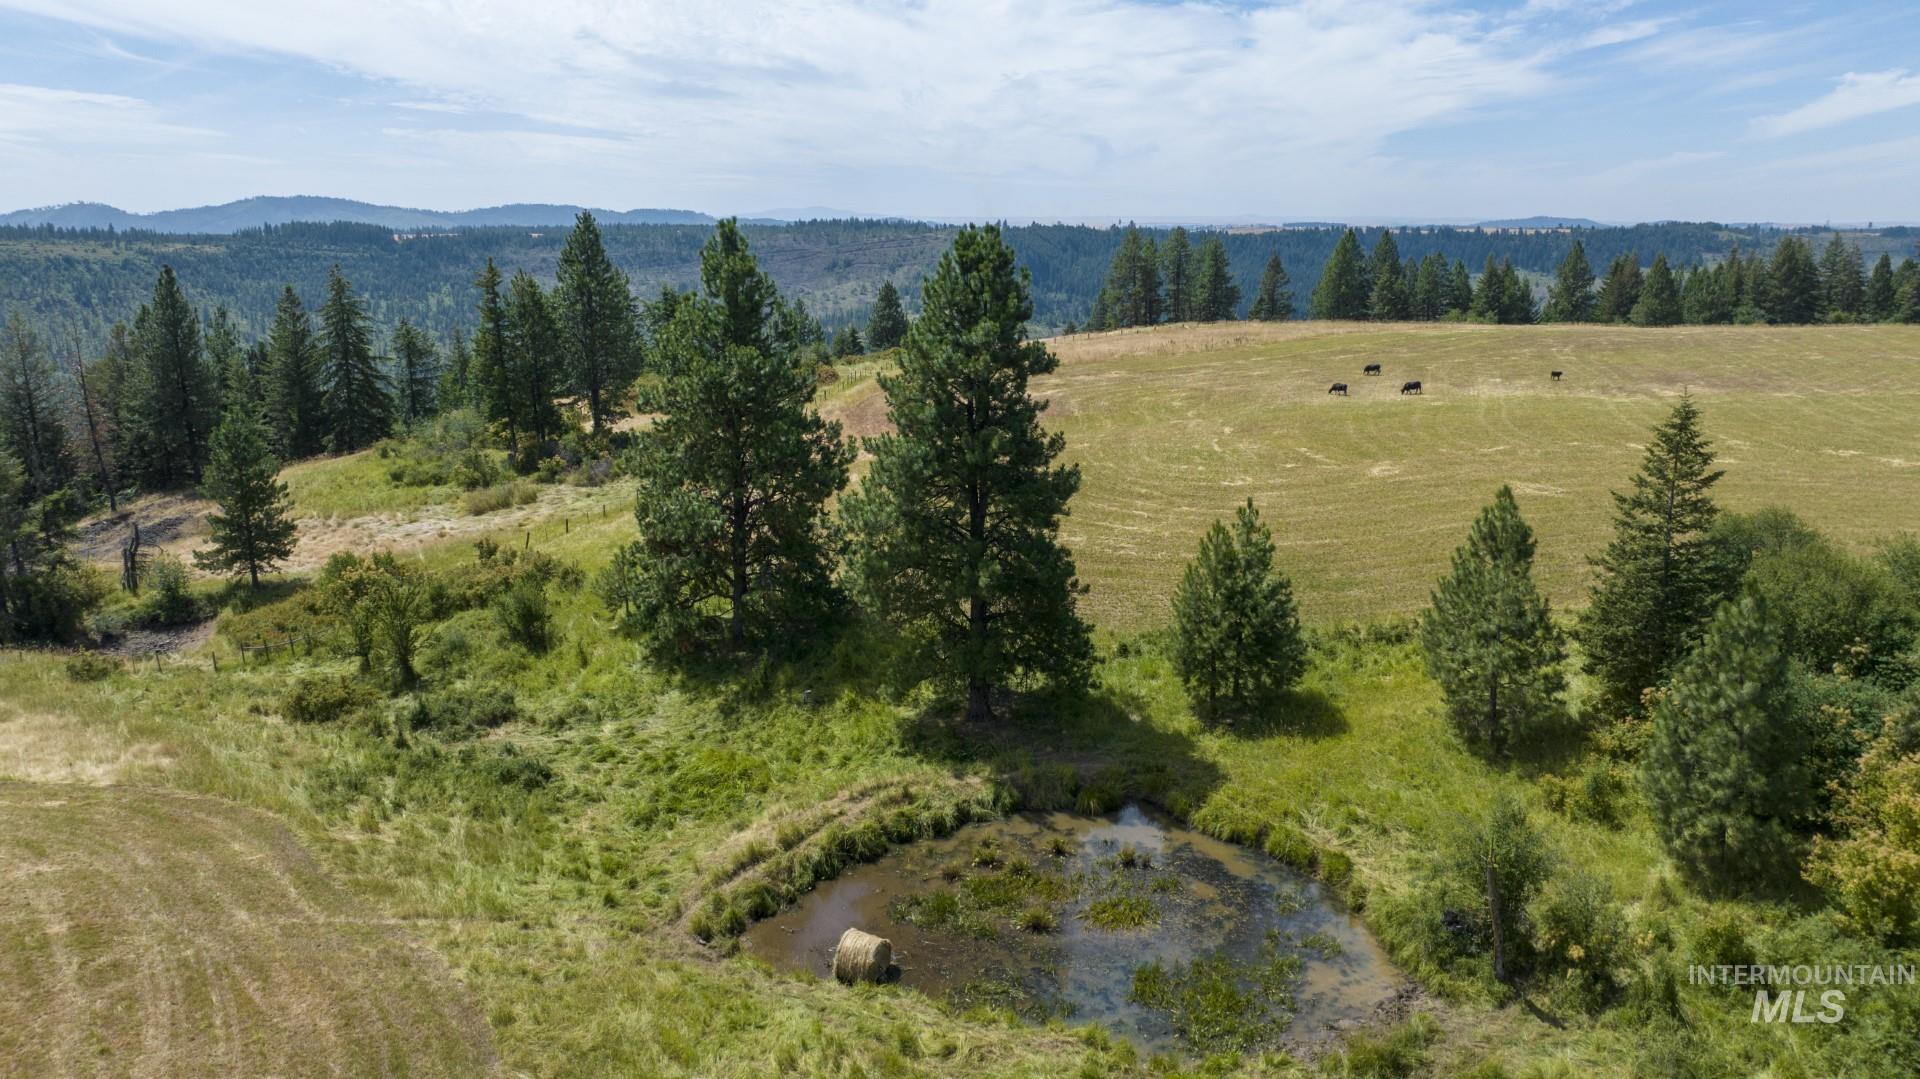 1605 Jasmine Ln, Parcel 15, Weippe, Idaho 83553, Land For Sale, Price $185,000,MLS 98854997